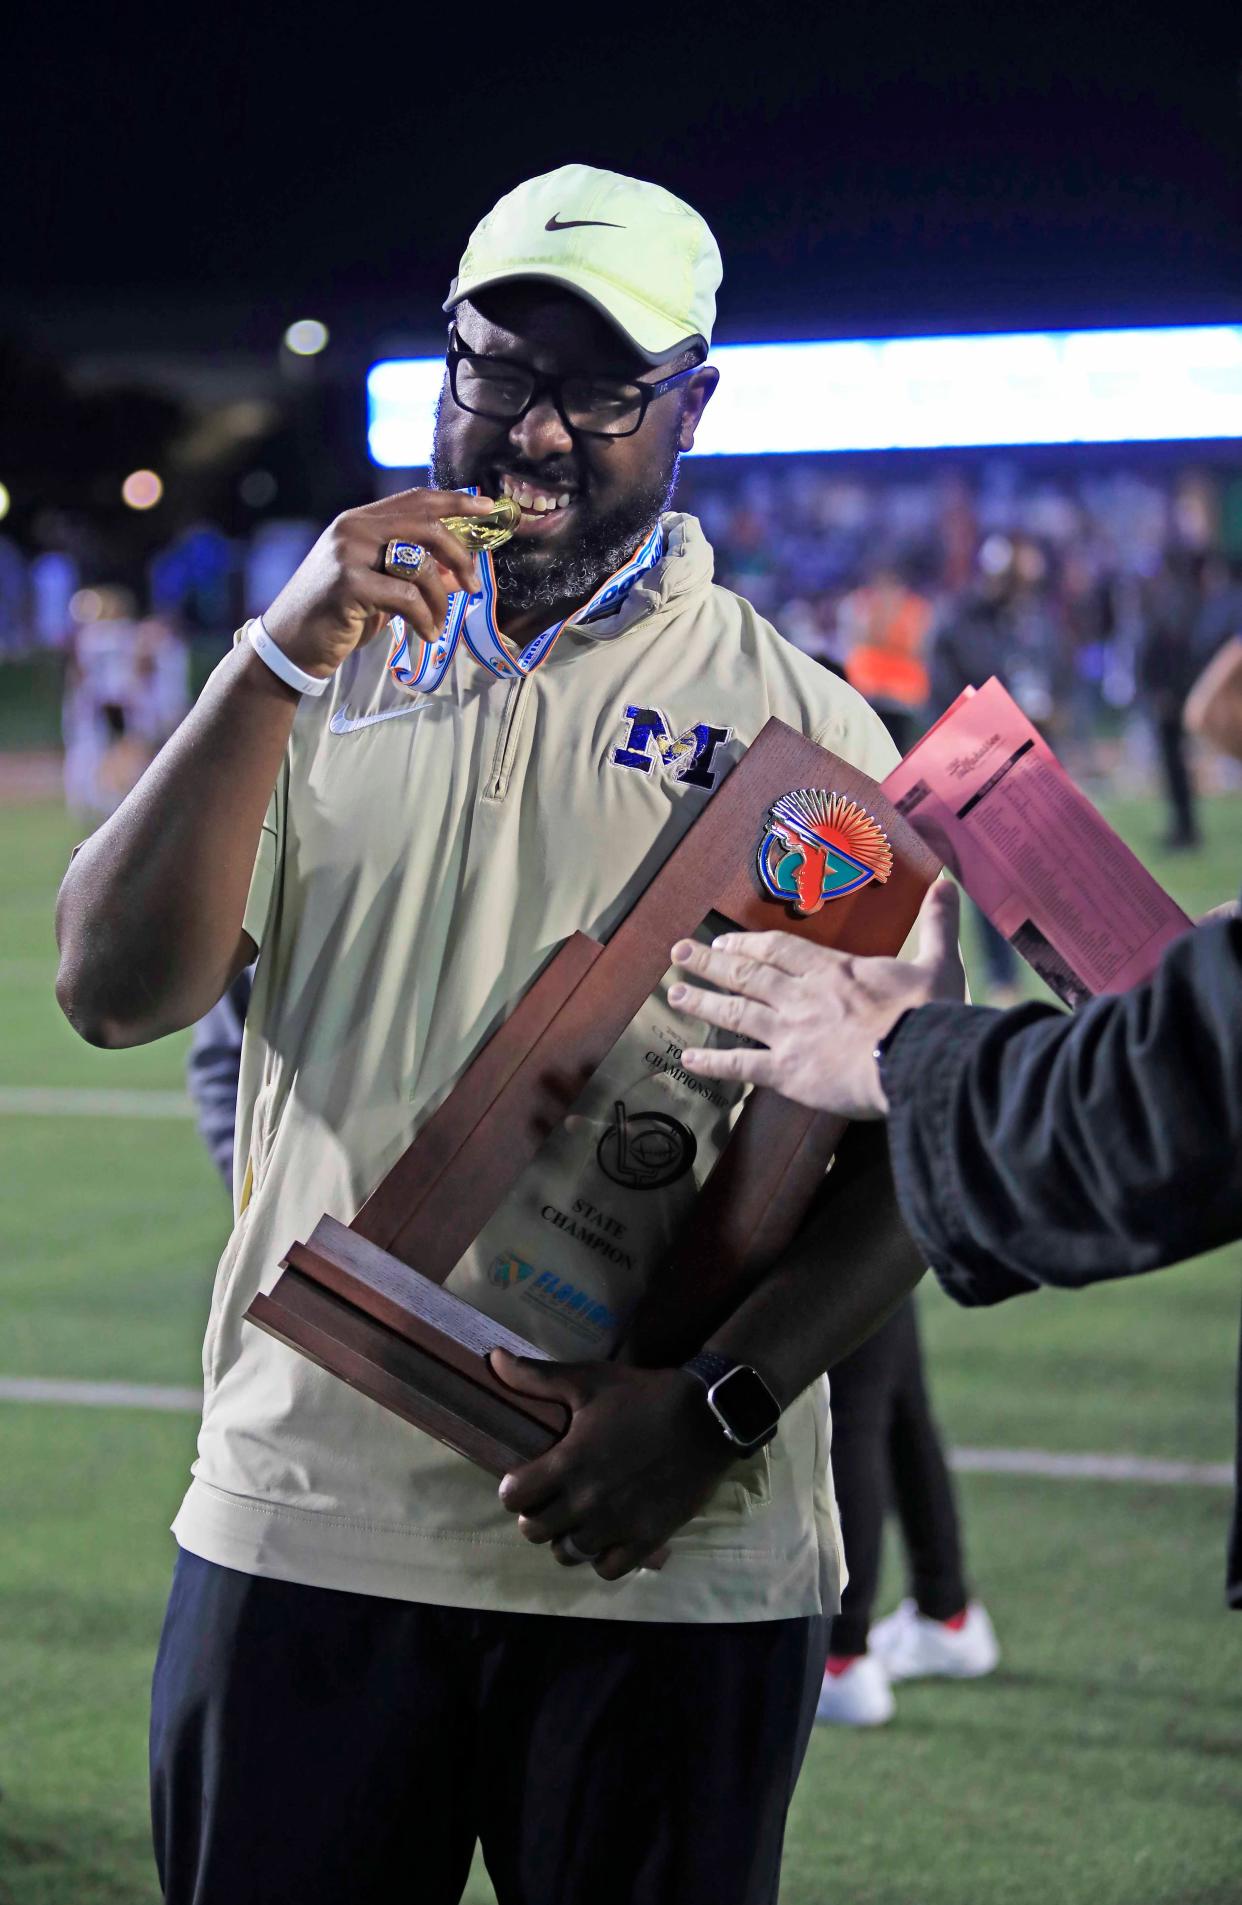 Mainland coach Travis Roland accepts the trophy after the Bucs claimed a 21-19 win over St. Augustine in the Class 3S state championship game on Thursday in Tallahassee.